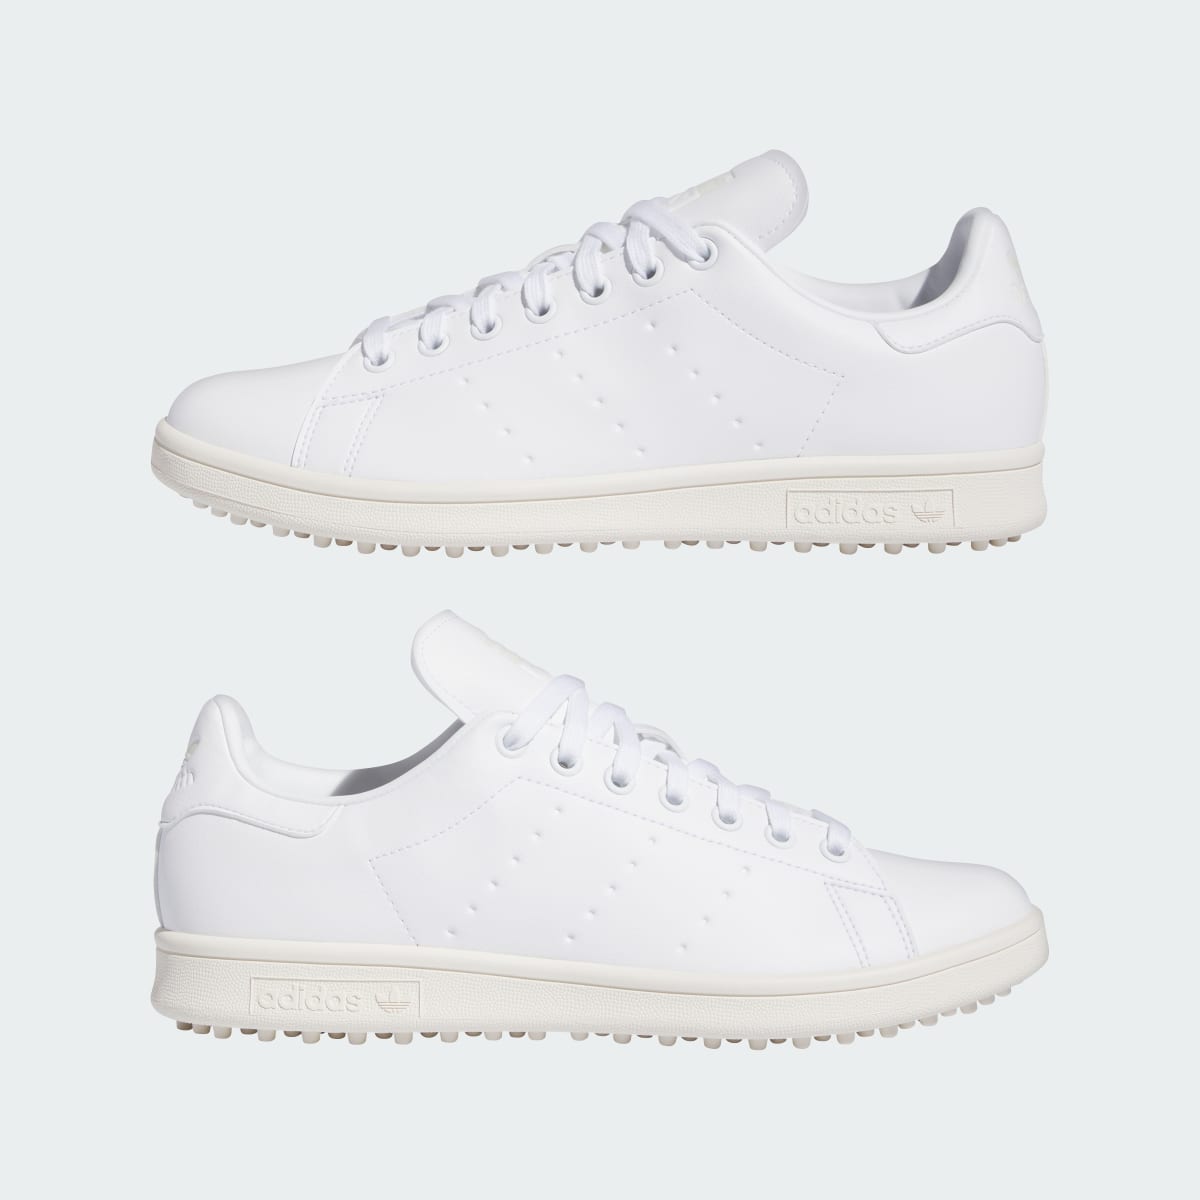 Adidas Stan Smith Golf Shoes. 8